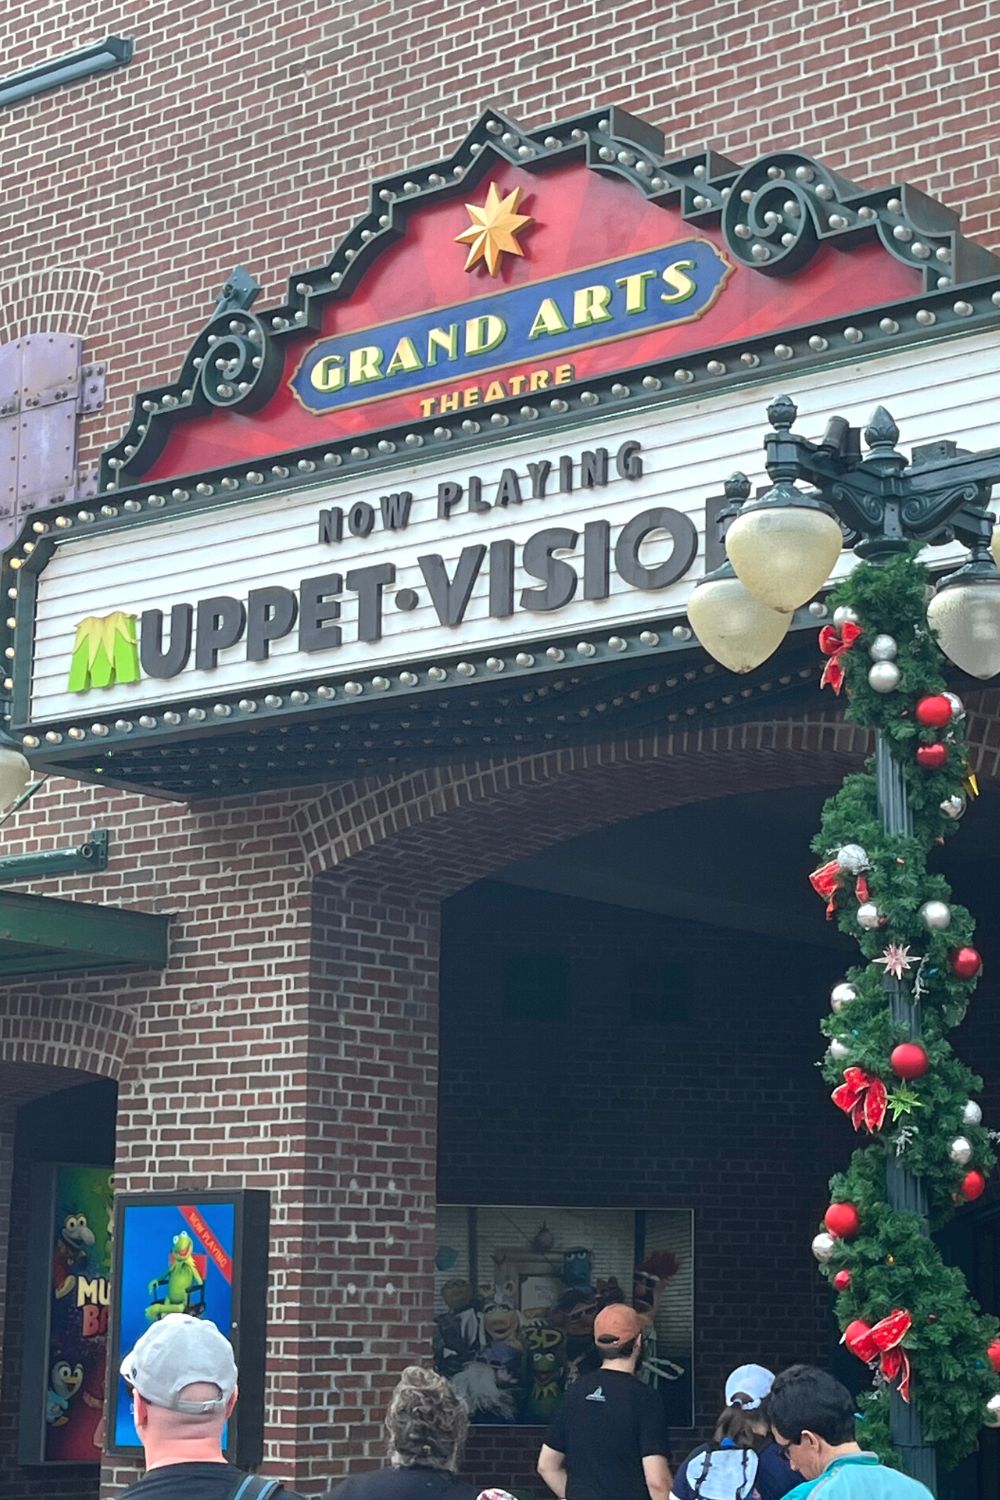 Muppet Vision 3D attraction at Hollywood Studios in Disney World